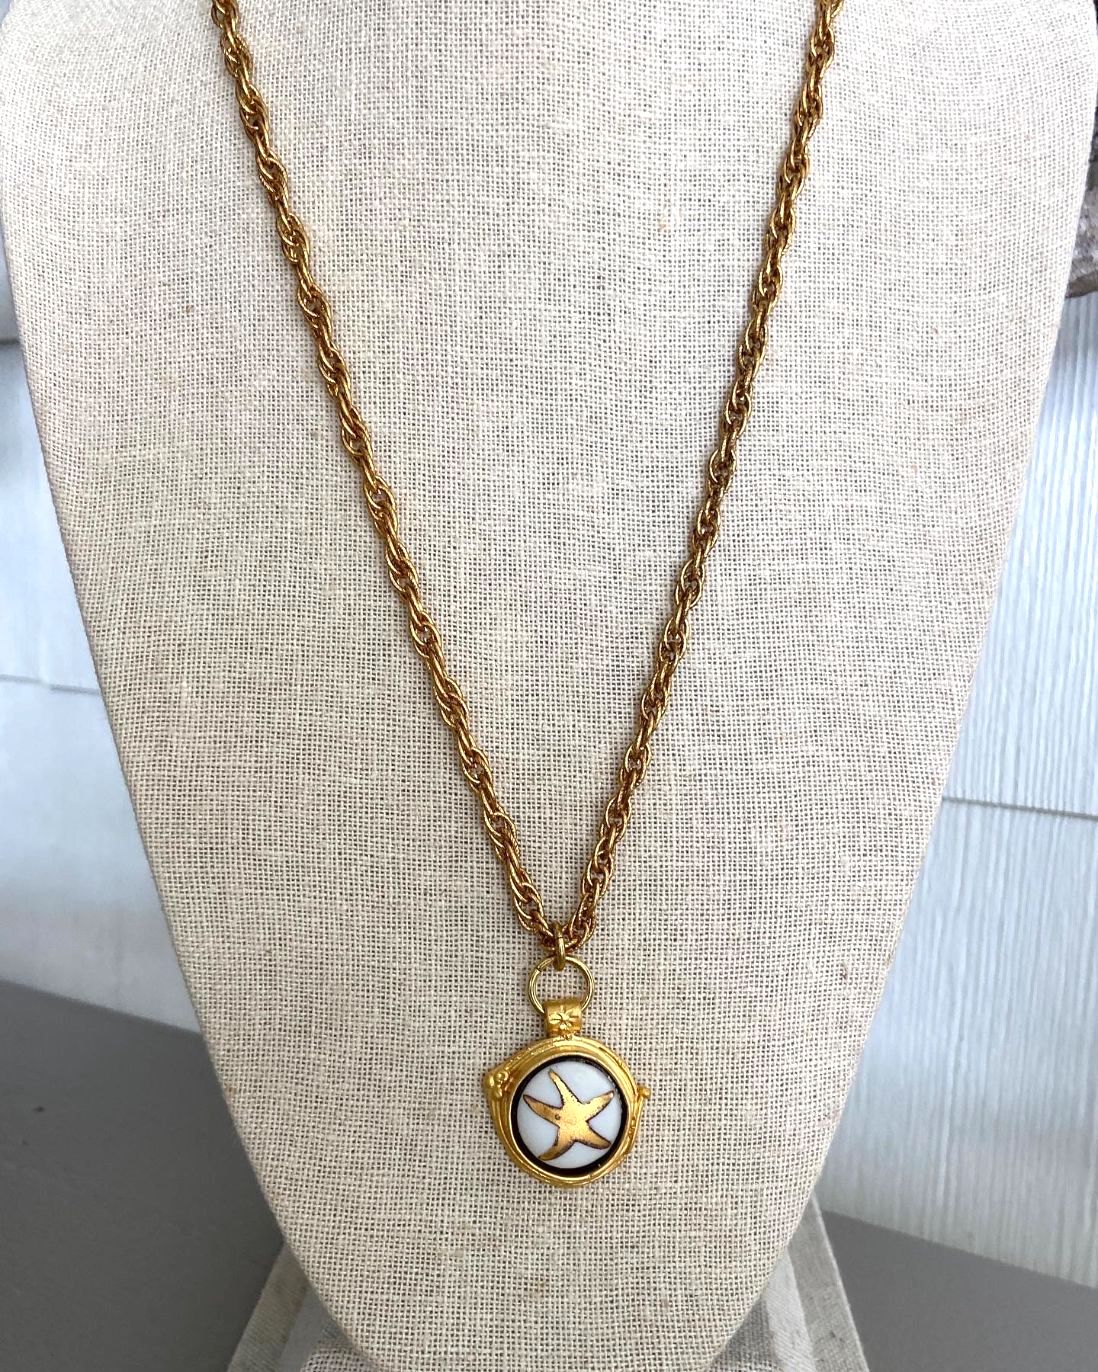 Gift for mom, gold bezel, hand painted gold starfish, gold filled chain, Starfish Necklace